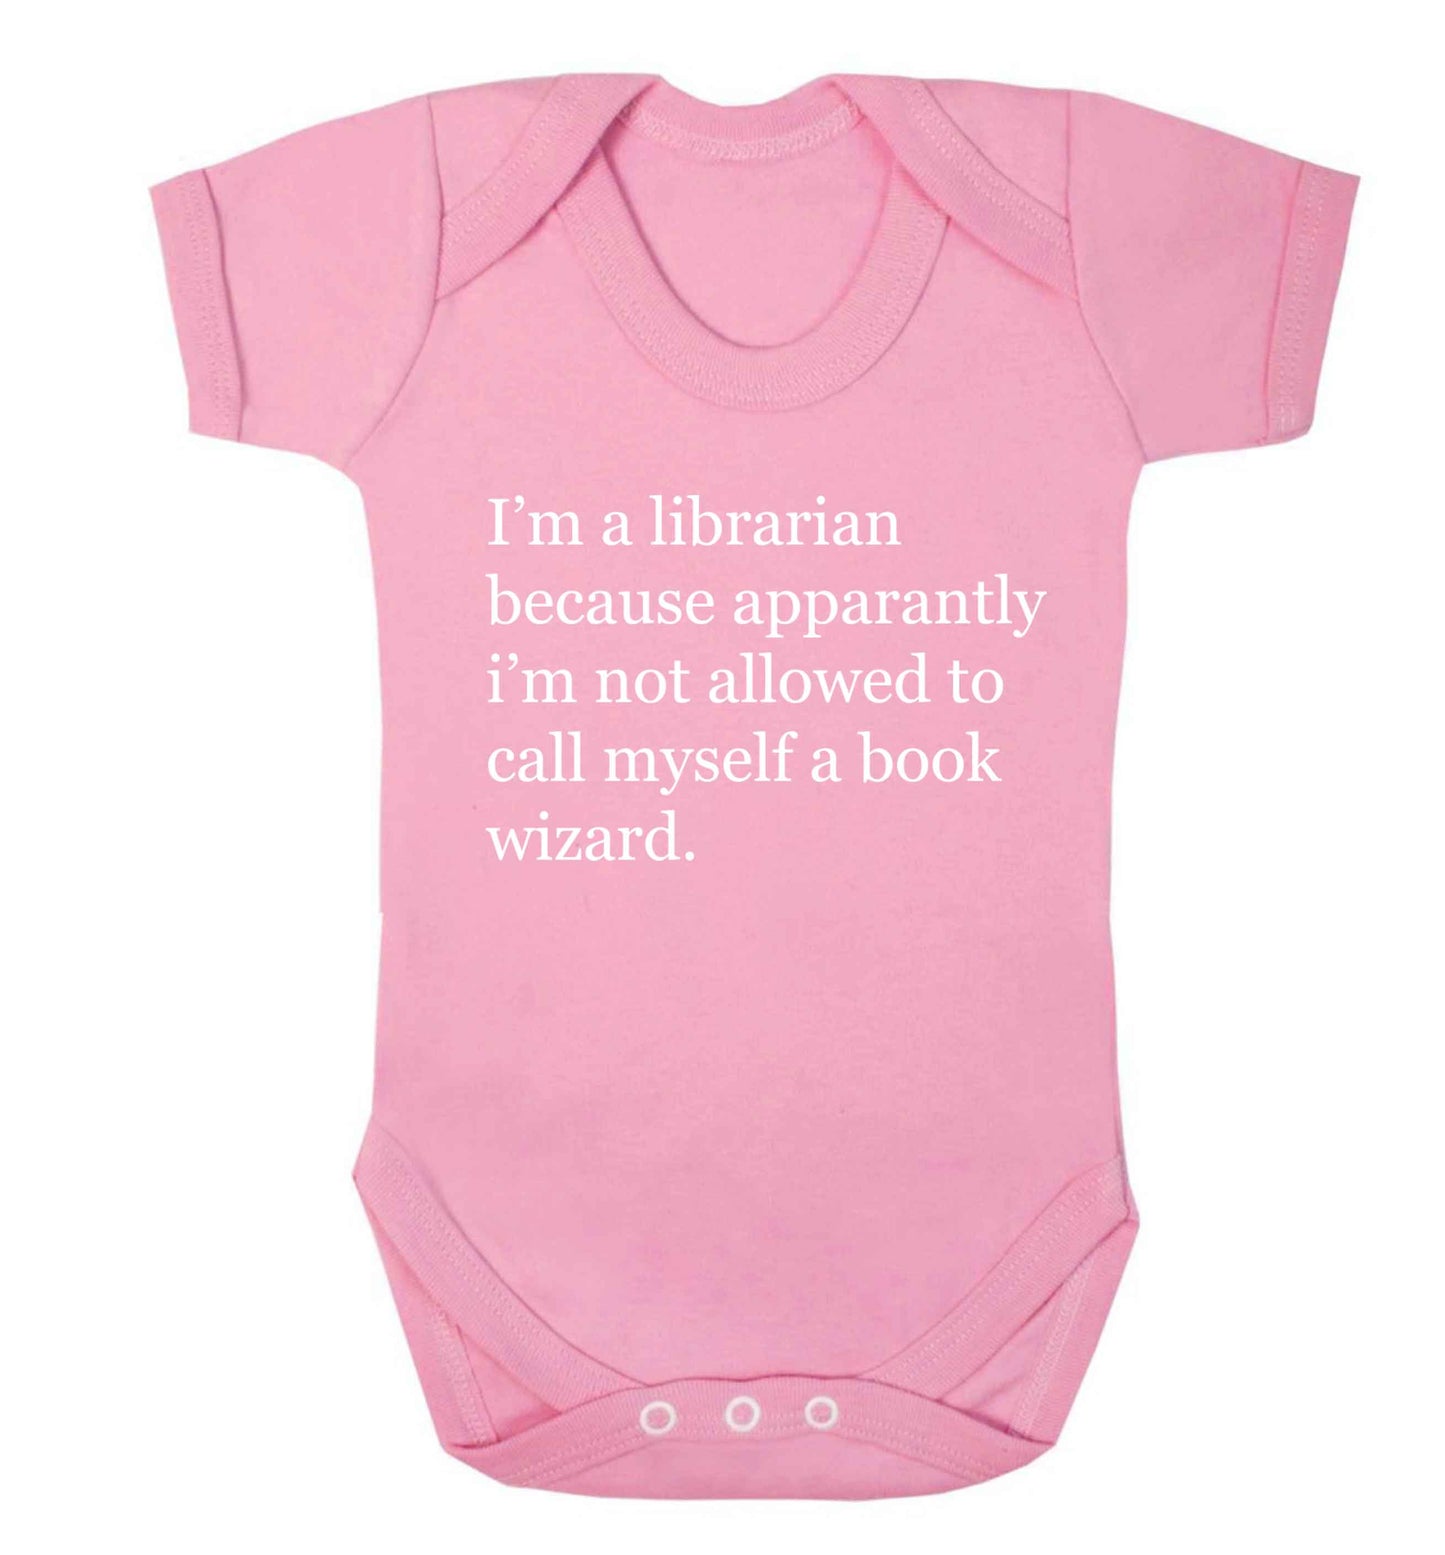 i√ïm a librarian because apparantly i√ïm not allowed to call myself a book wizard Baby Vest pale pink 18-24 months